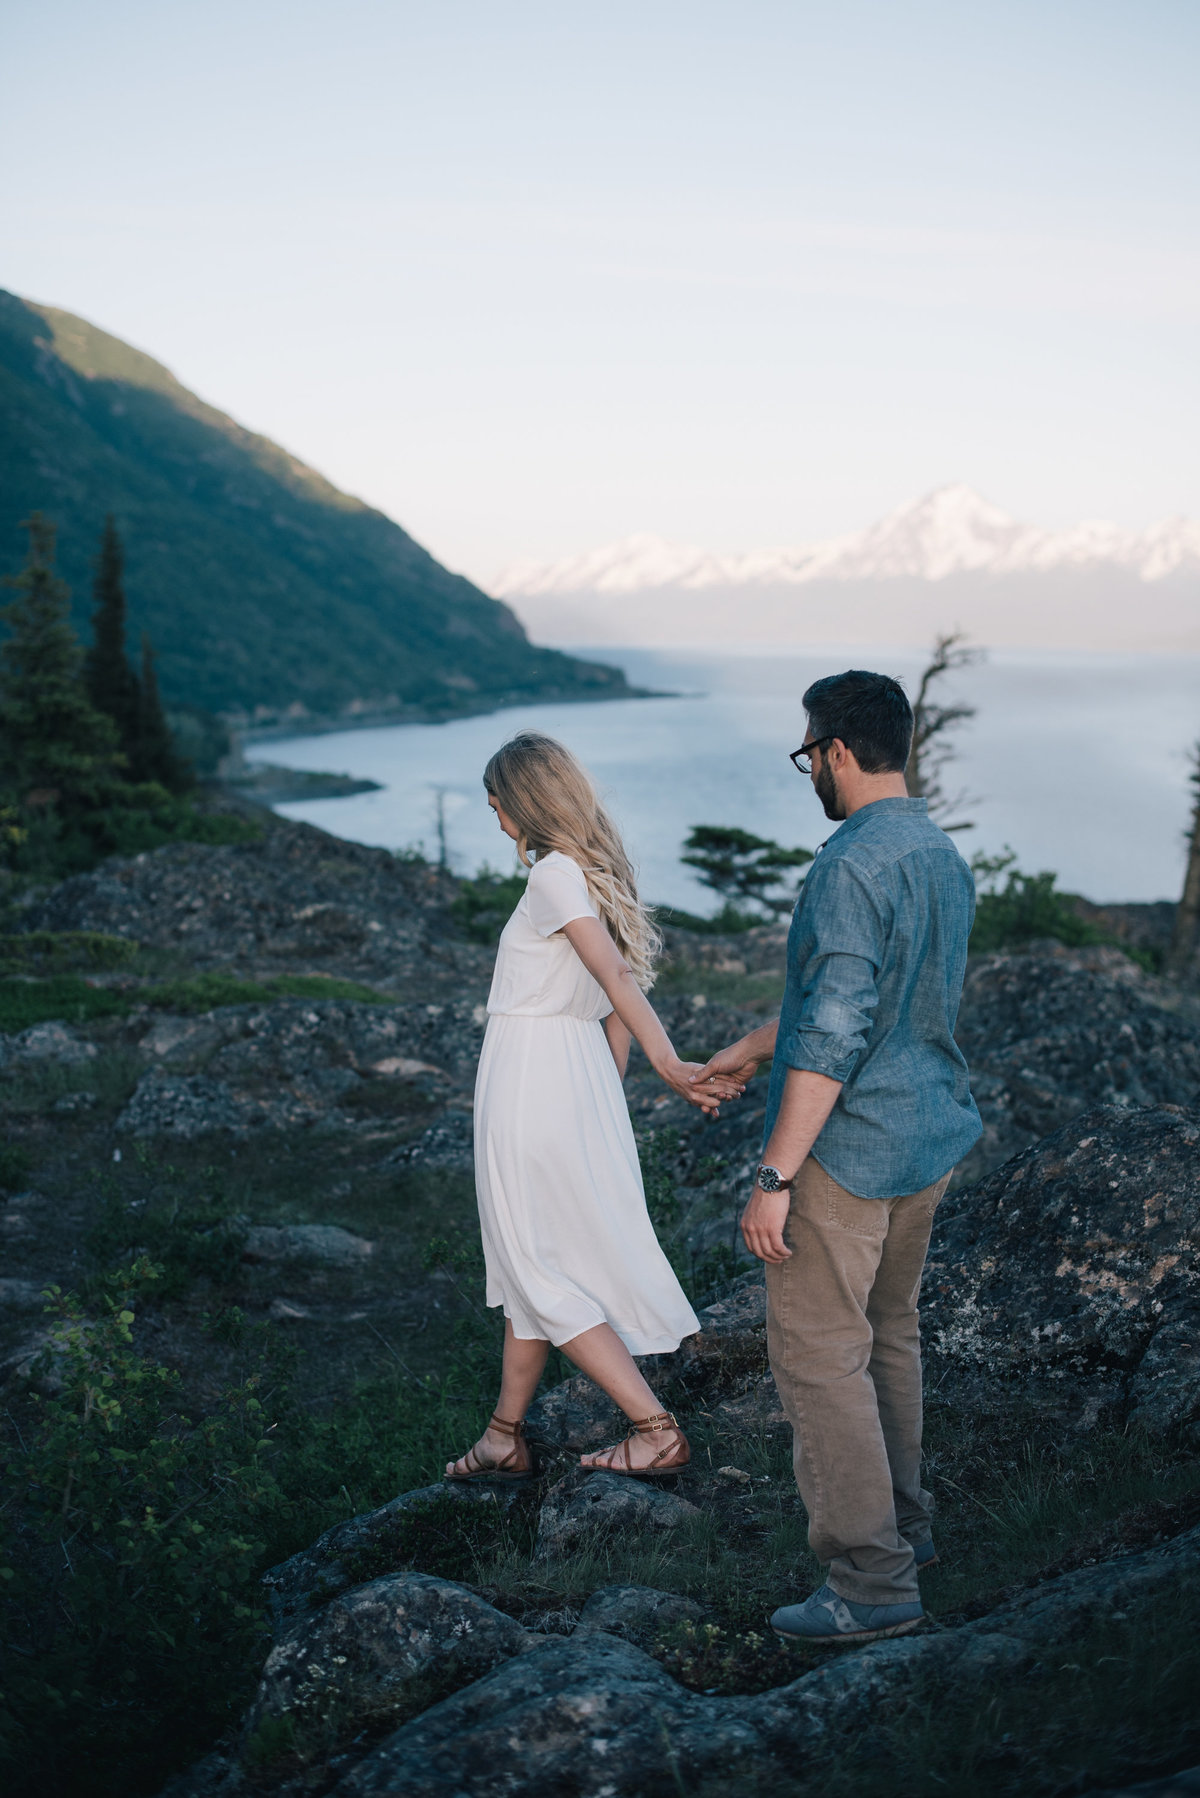 027_Erica Rose Photography_Anchorage Engagement Photographer